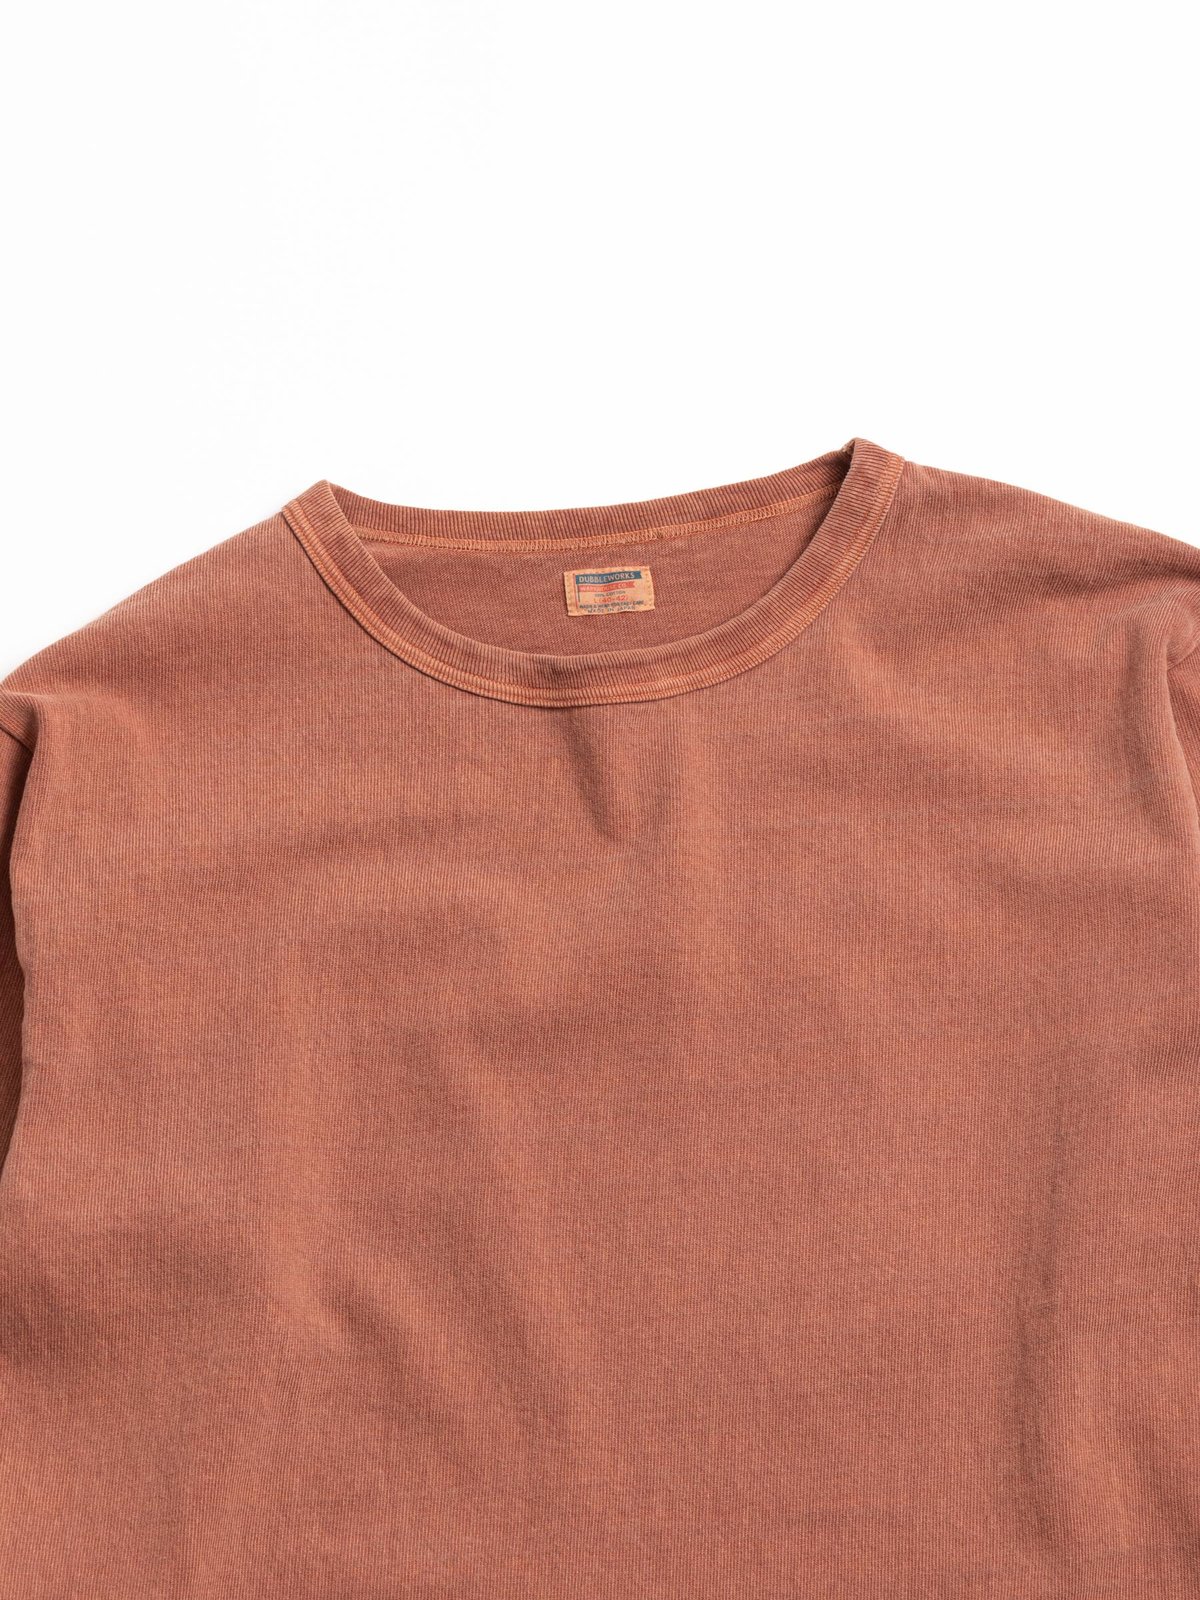 HEAVY WEIGHT PIGMENT DYED L/S TEE BRICK RED by DOUBLEWORKS – The Bureau ...